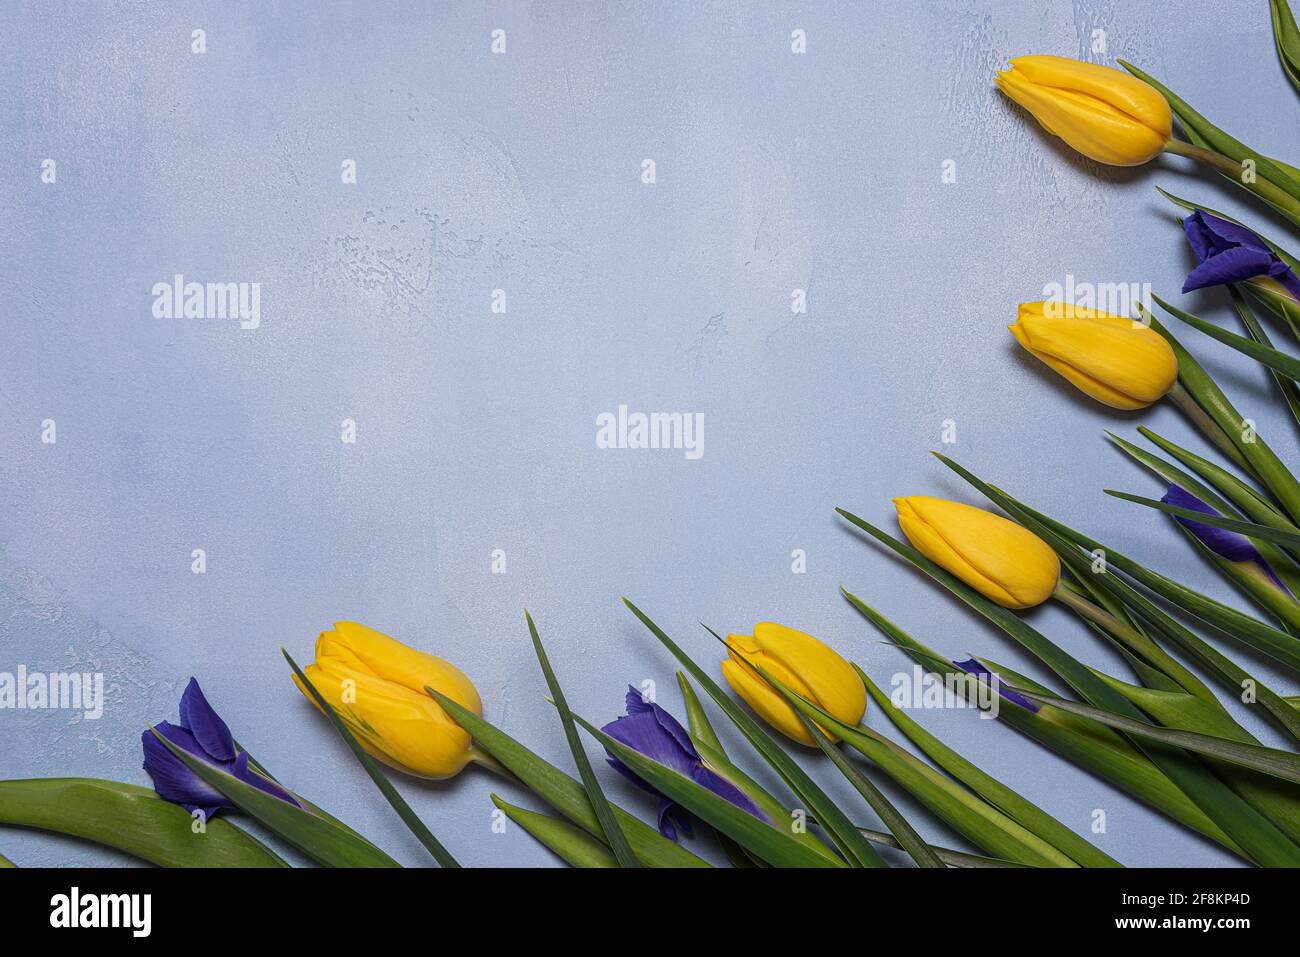 Frame with yellow tulip and blue iris flowers with green leaves on blue textured concrete. Seasonal background with fresh natural flower flat lay and Stock Photo